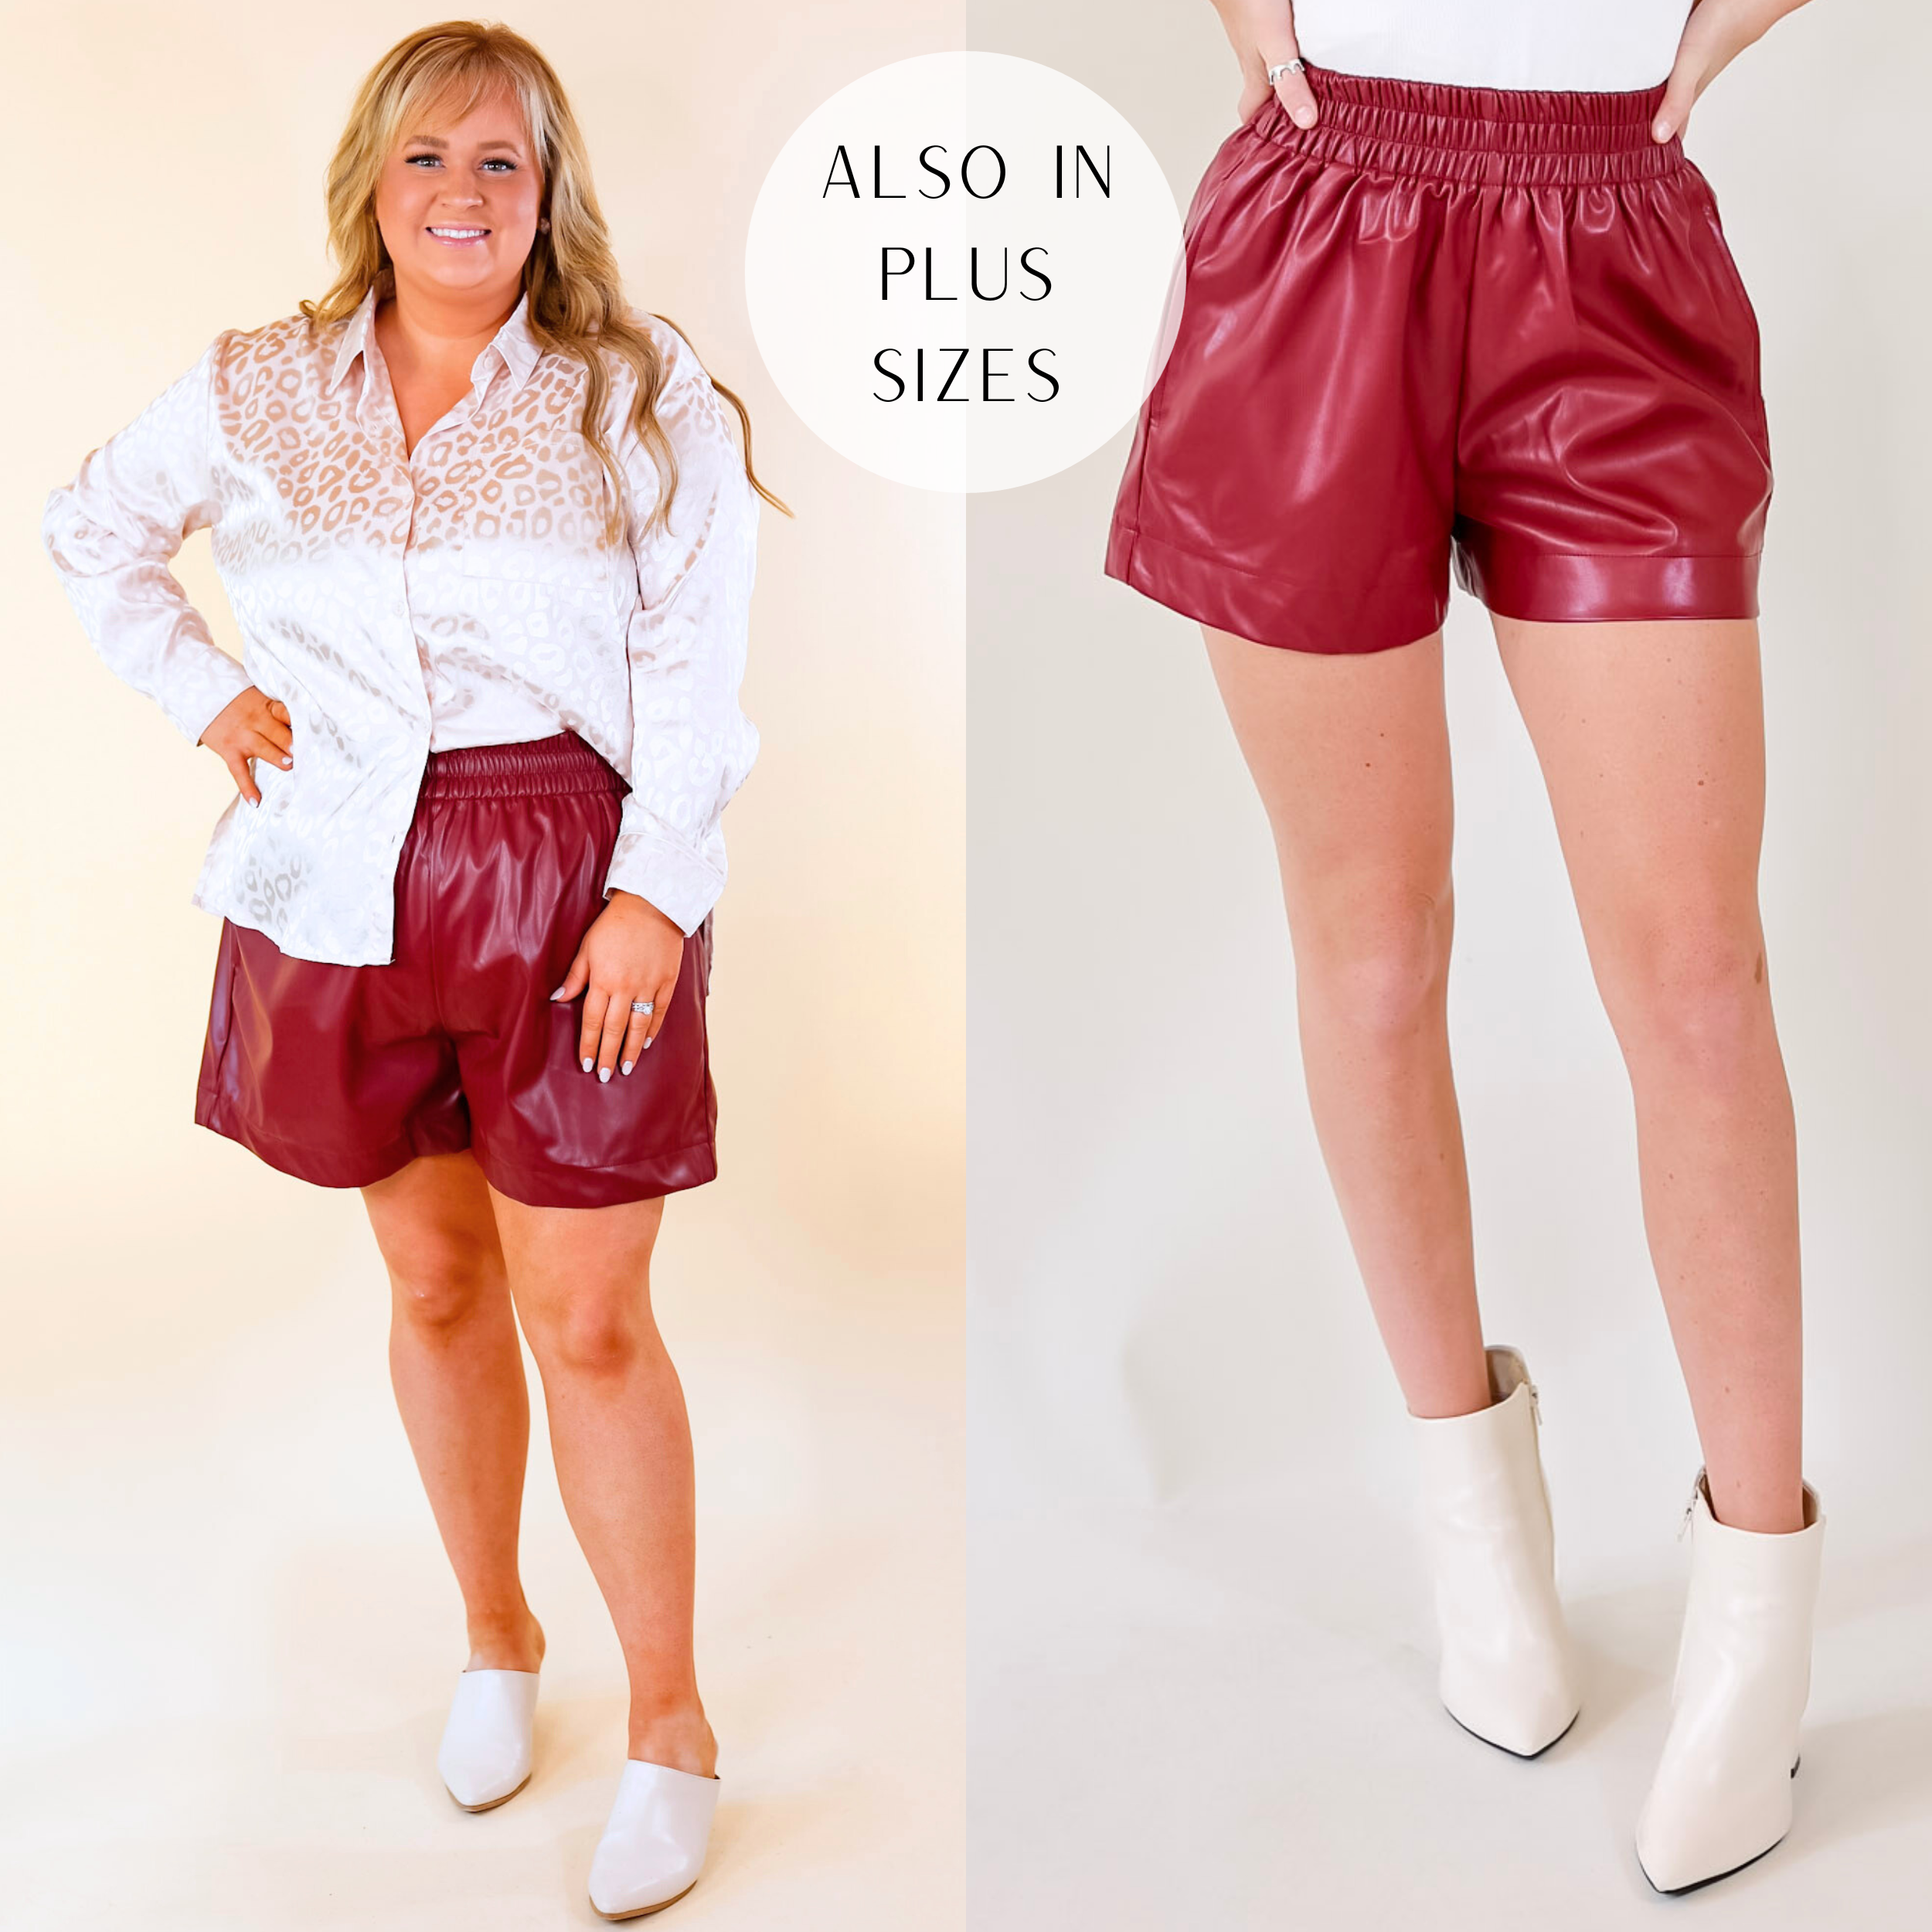 Model is wearing a pair of dark red faux leather shorts featuring a stretchy waistband and pleated design.